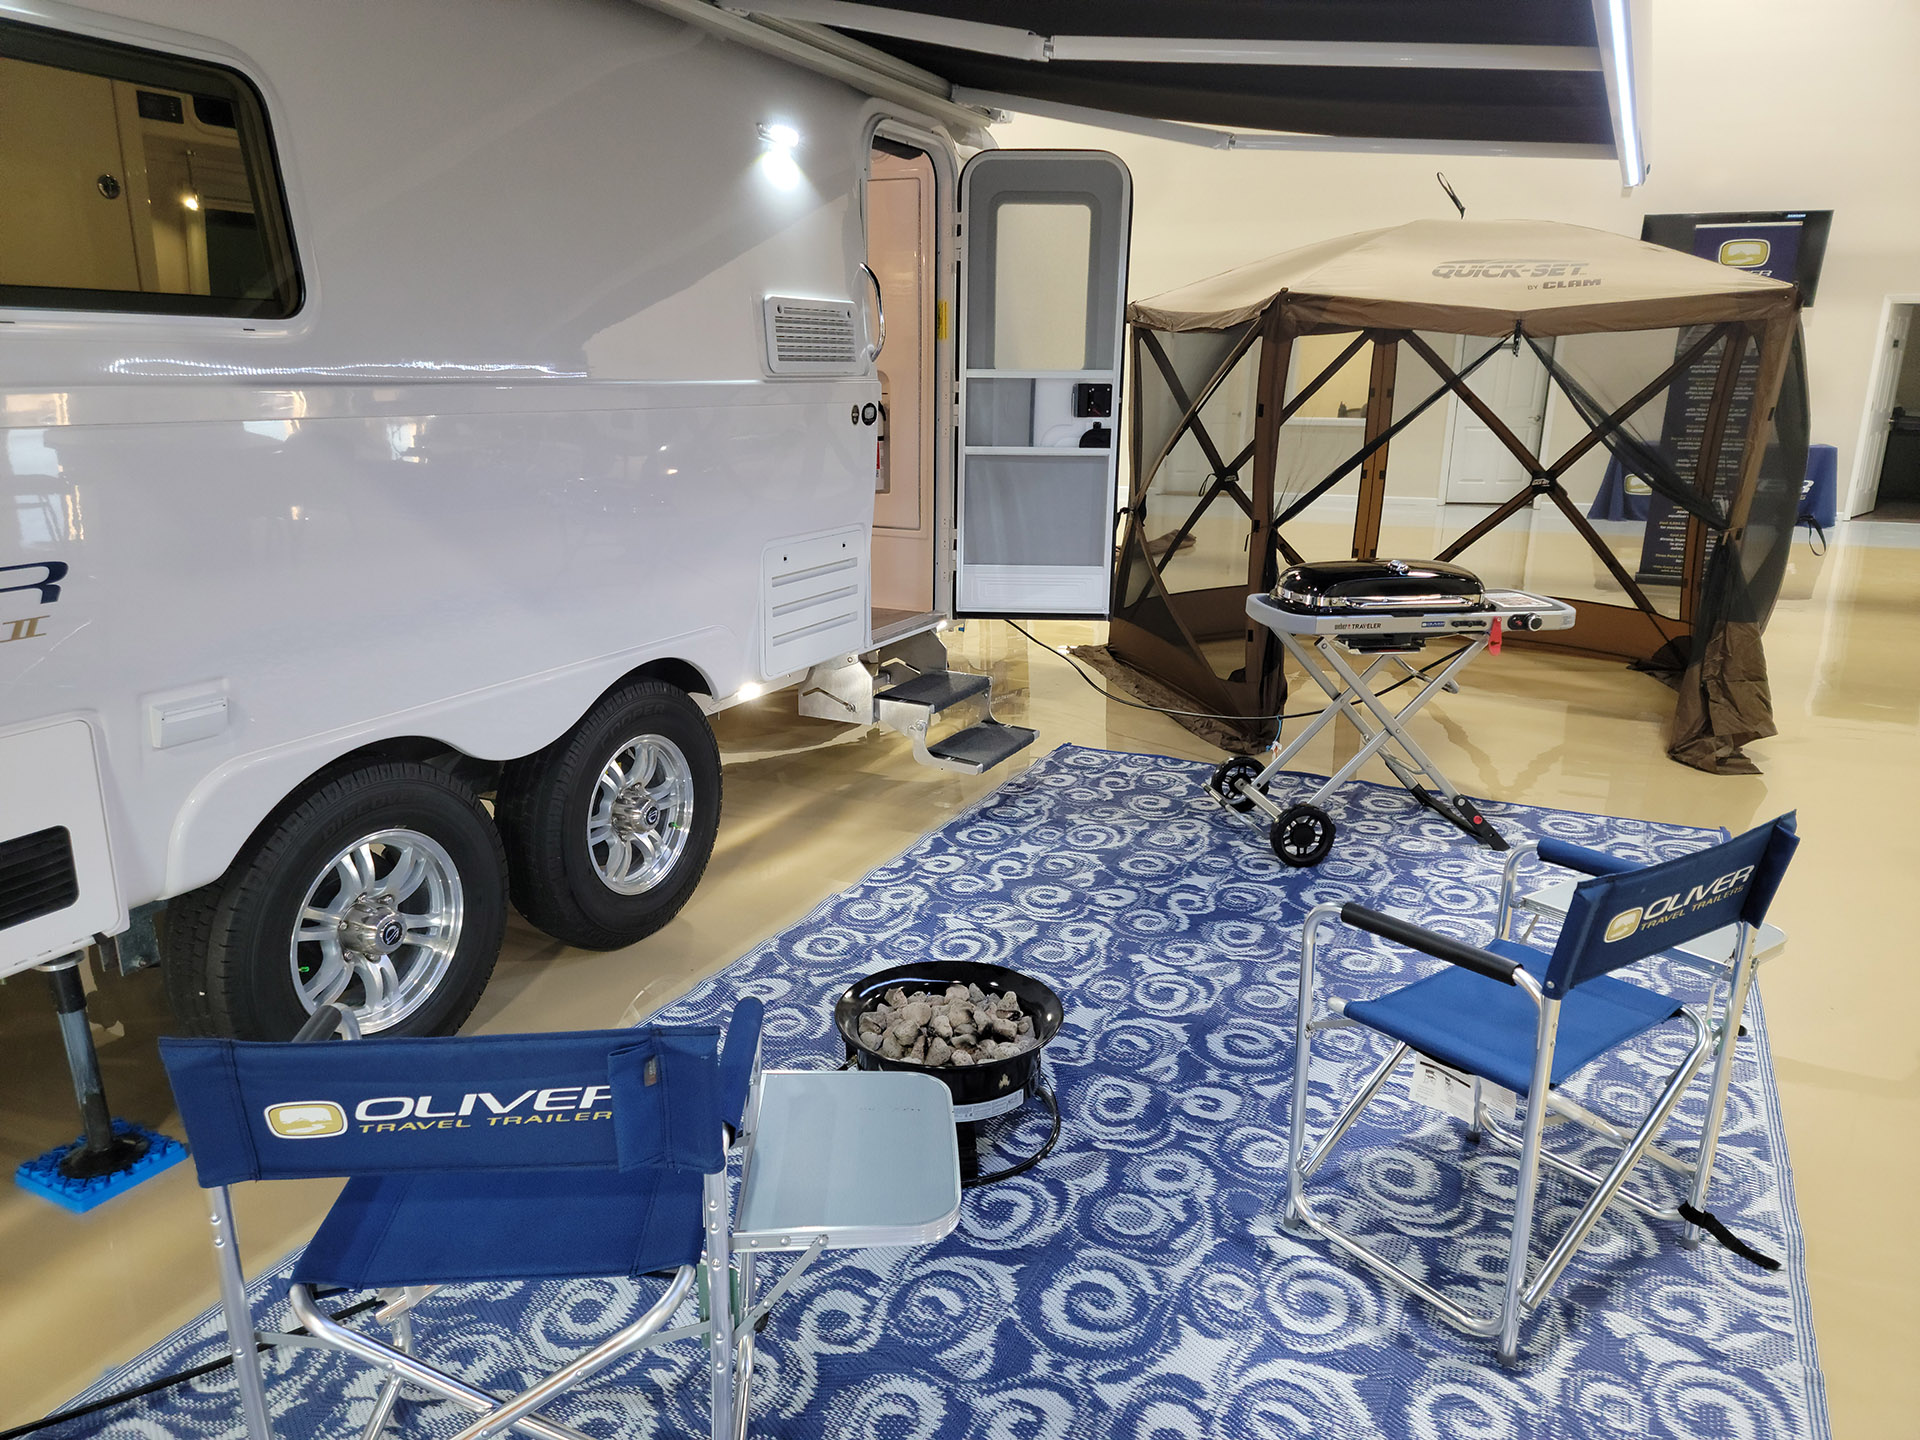 Additional Dometic Awning